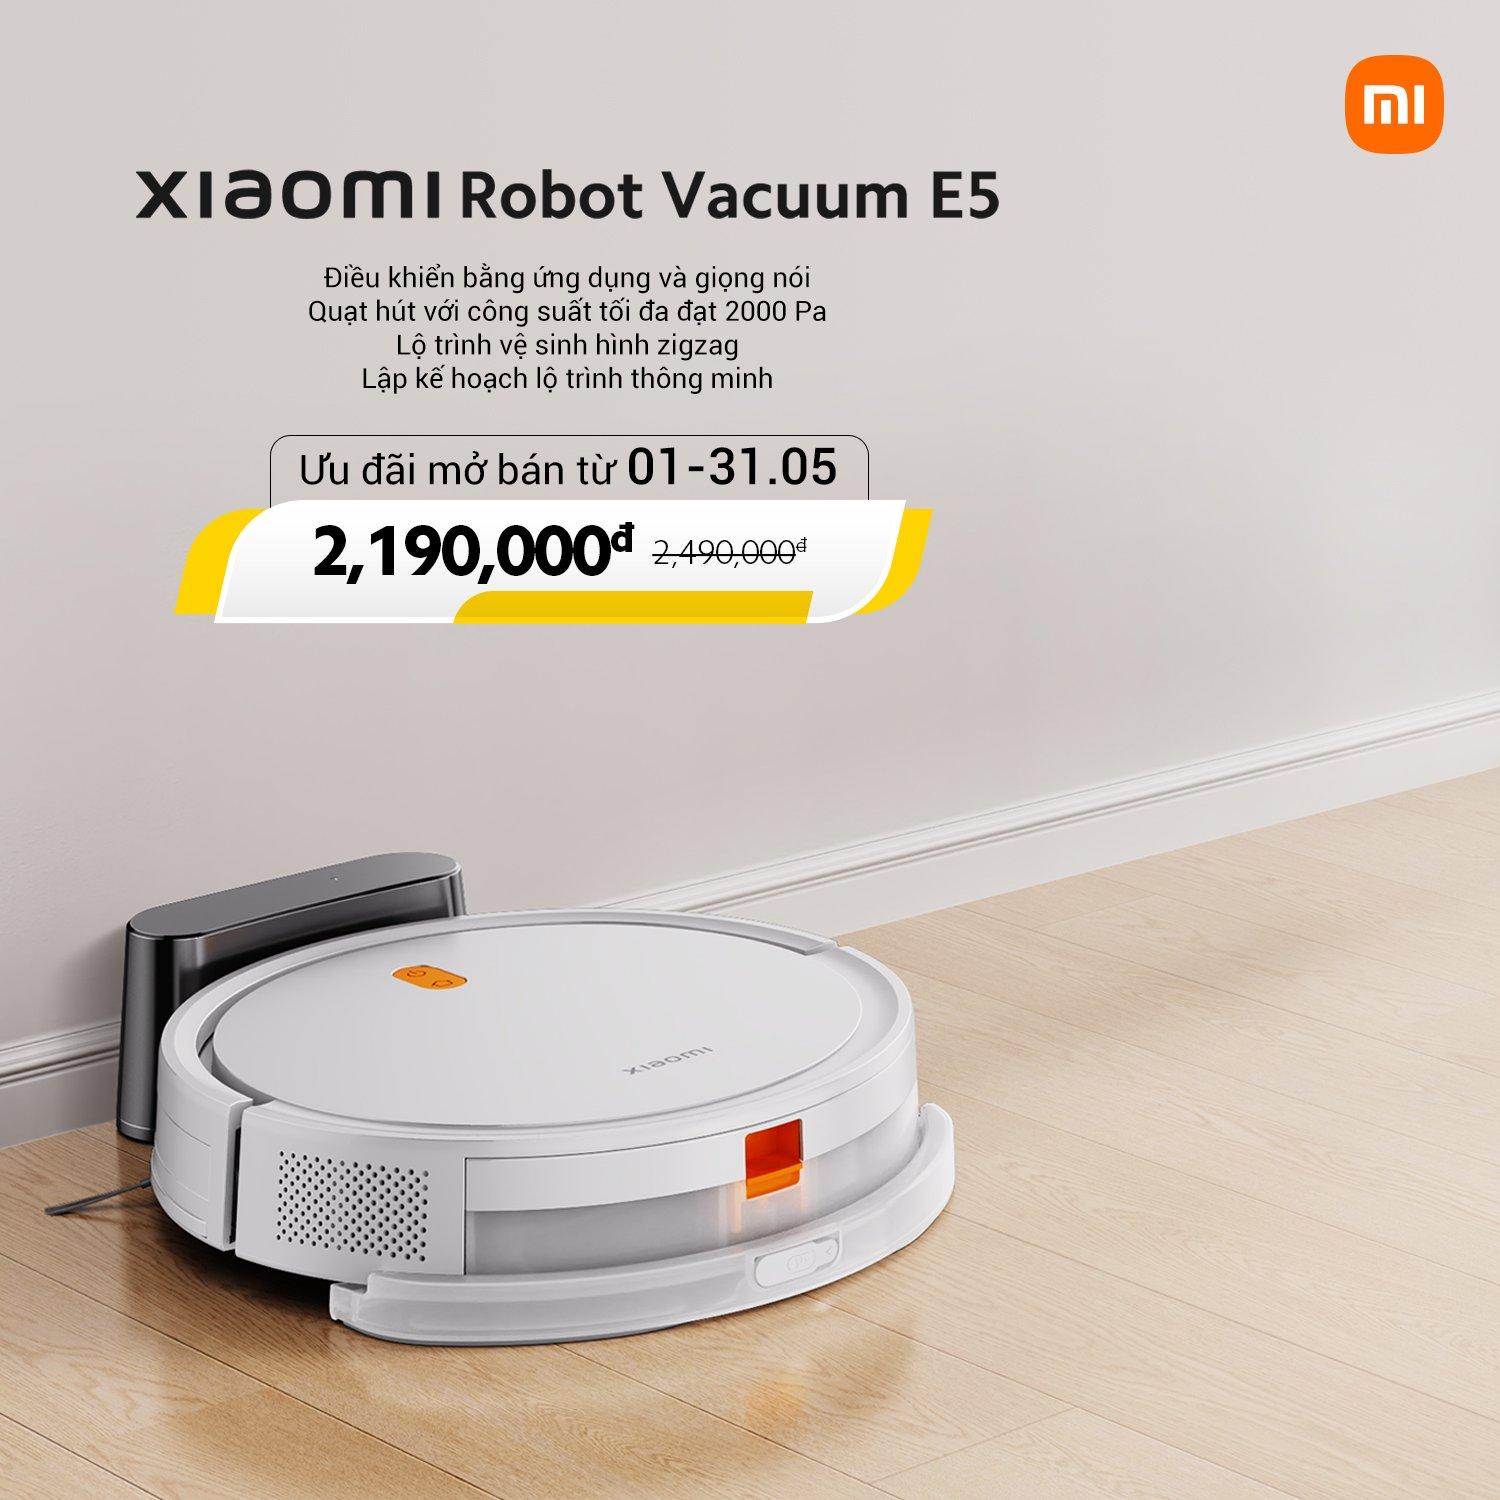 Own the ultimate cleaning machine for only 2 million VND - 4